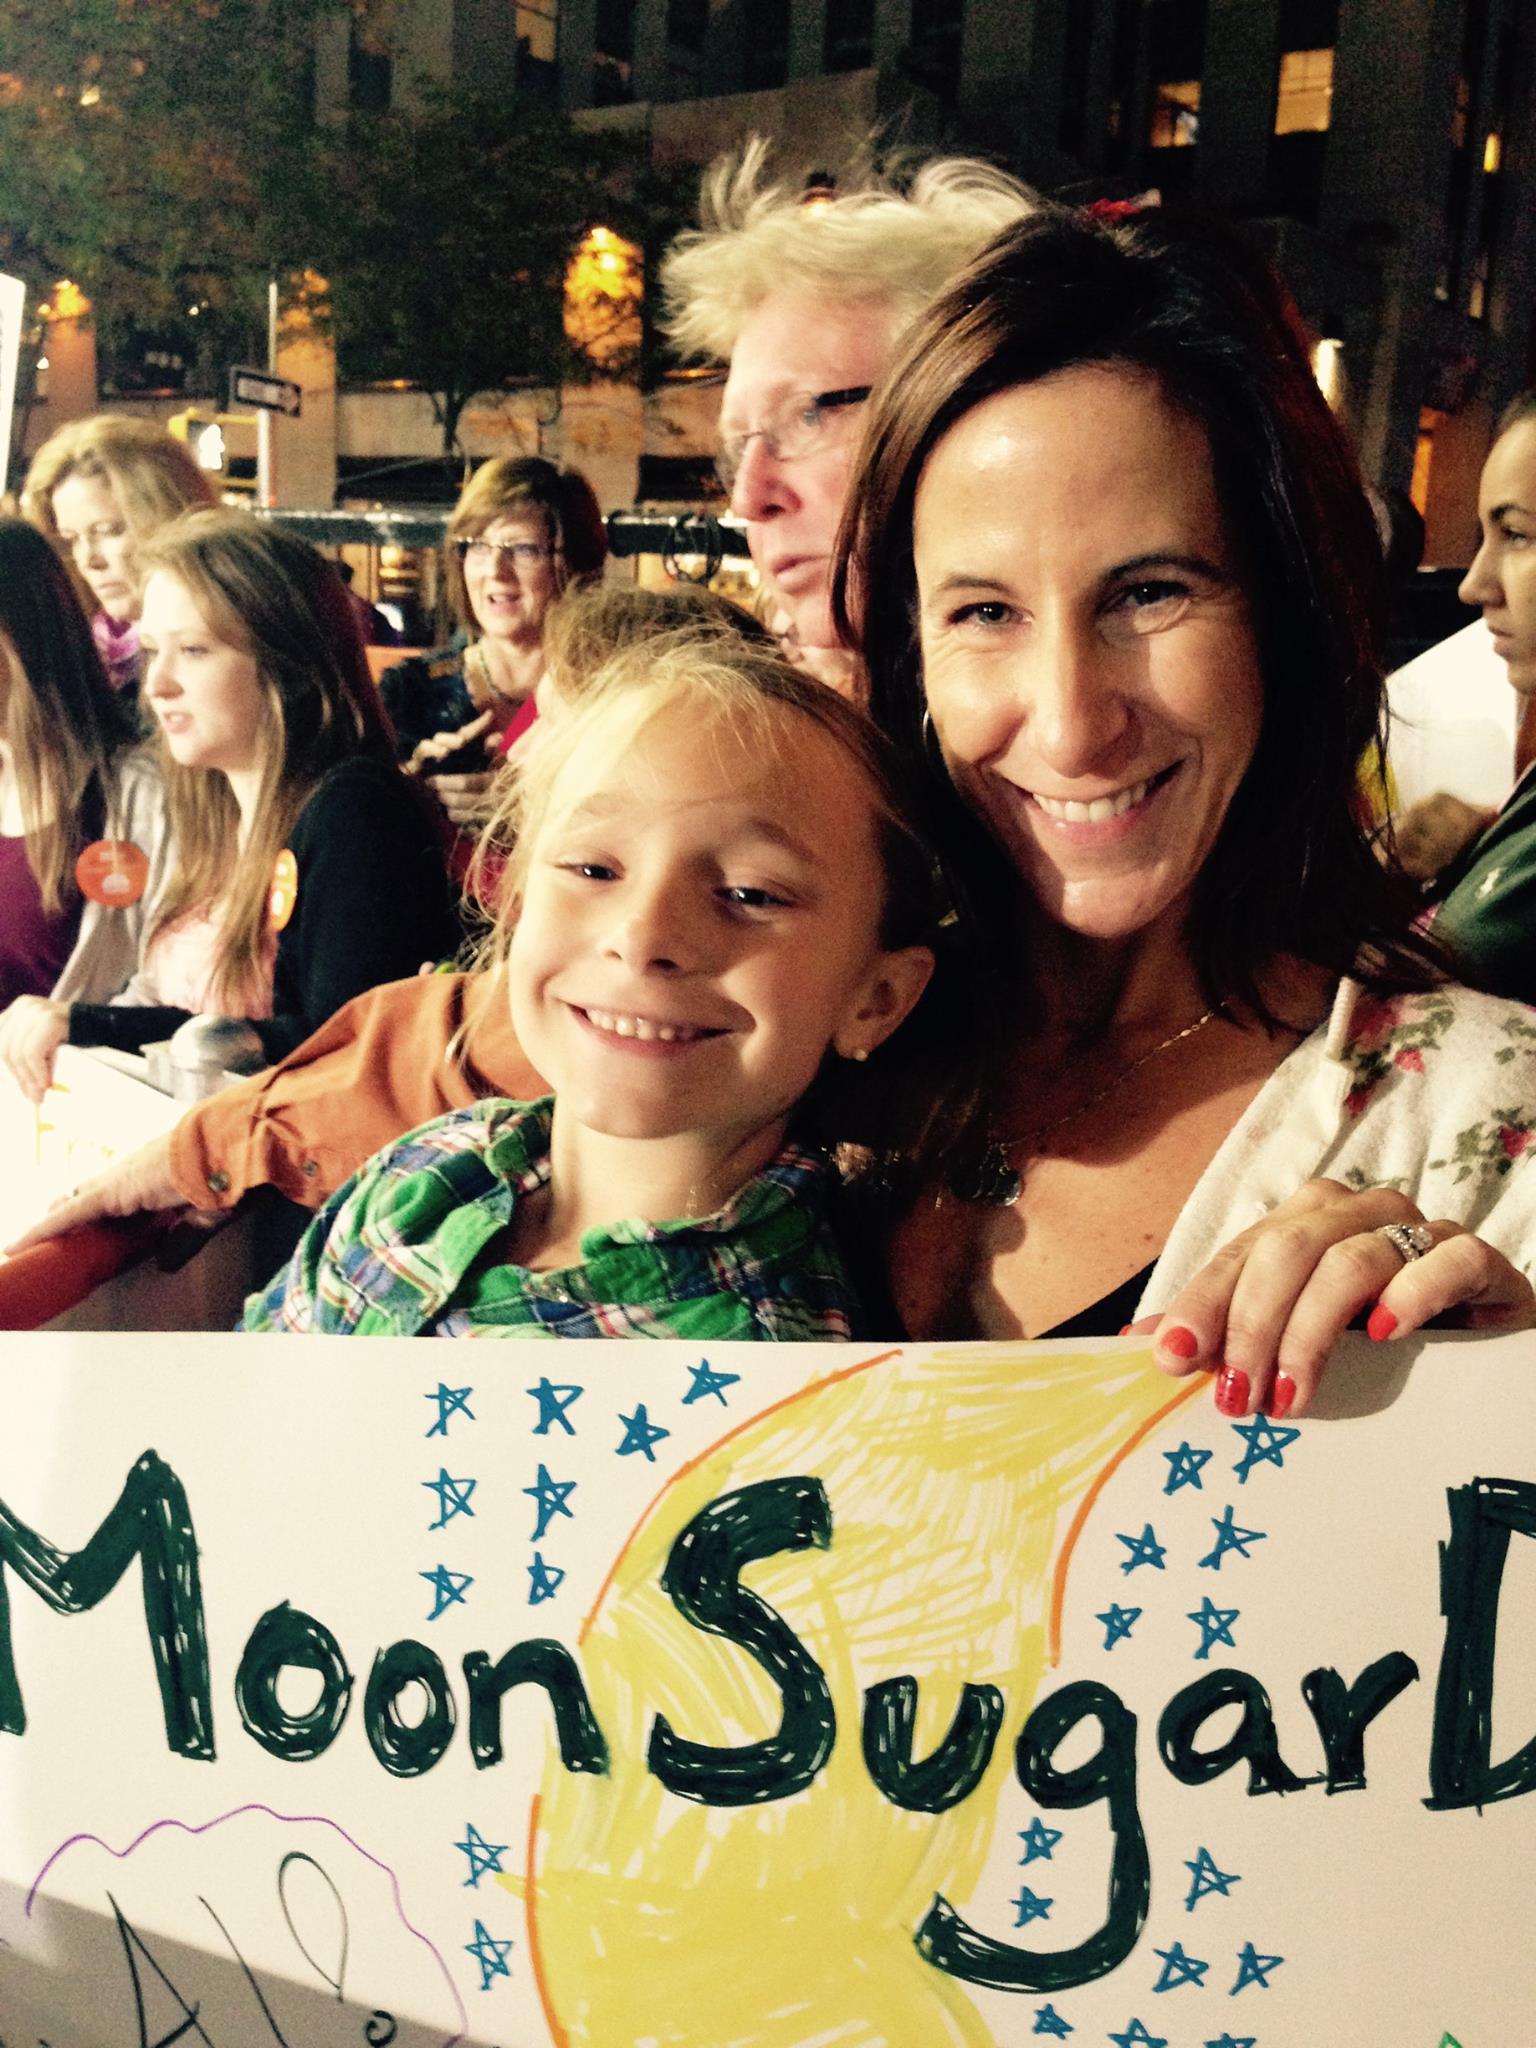 Family Owned - moonsugar at today show